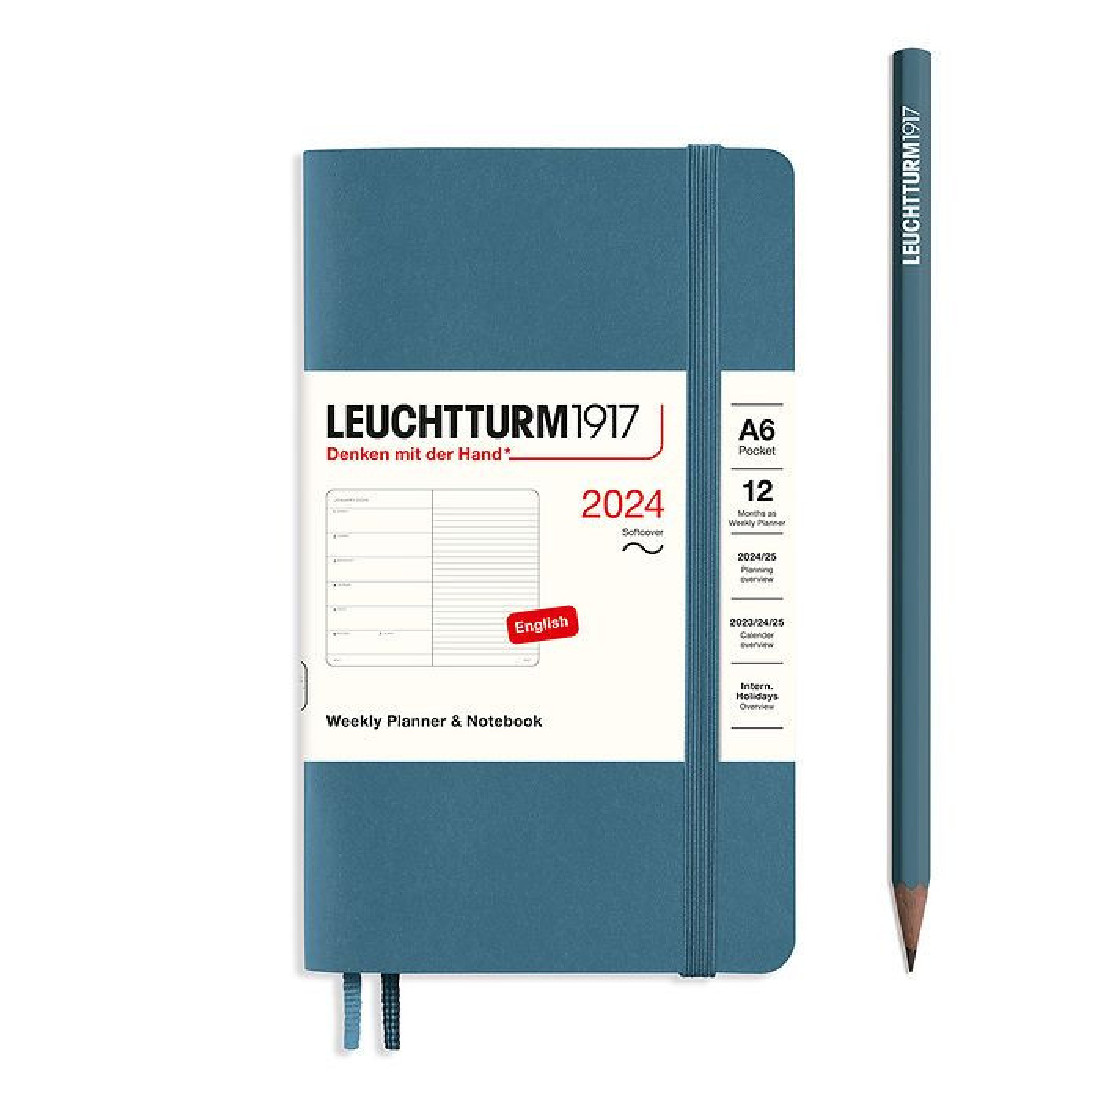 Leuchtturm 1917 Weekly Planner and Notebook 2024 Stone Blue Pocket A6 Soft Cover